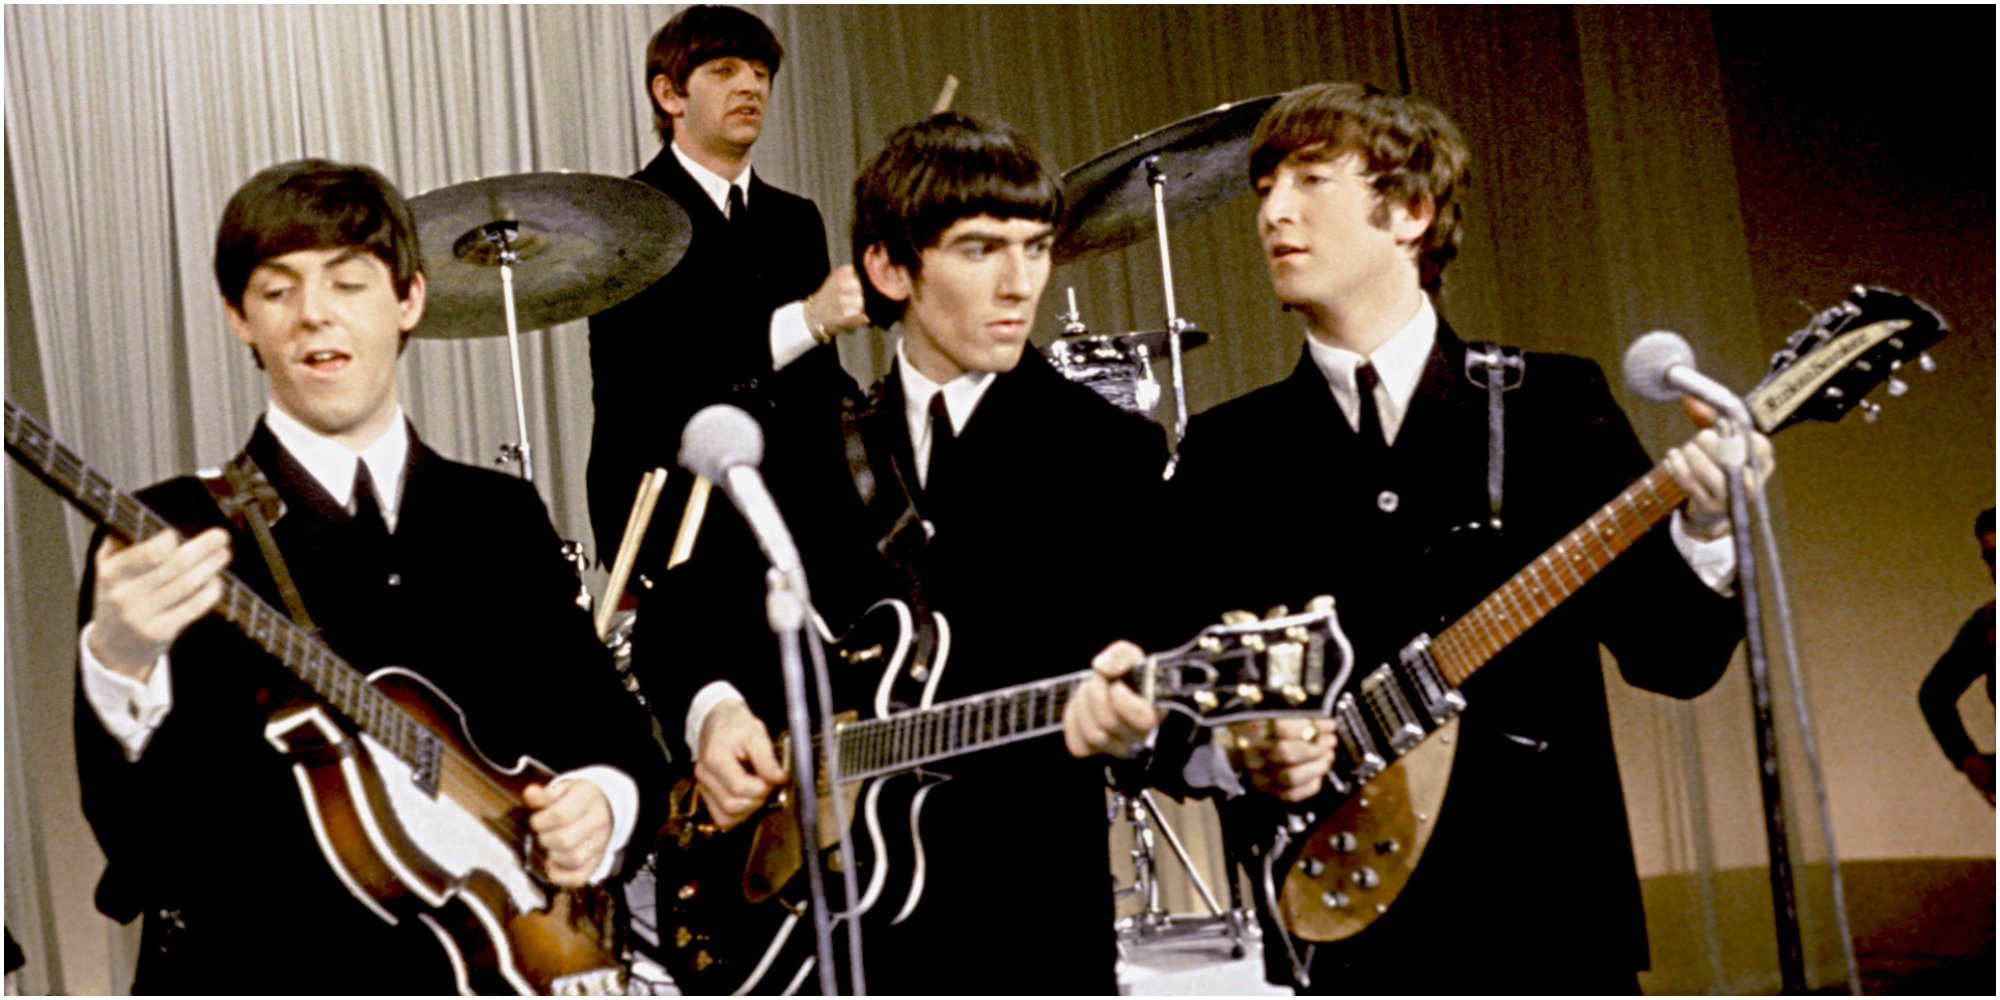 The Beatles perform onstage still from their movie 'A Hard Day's Night' which was released in 1964 